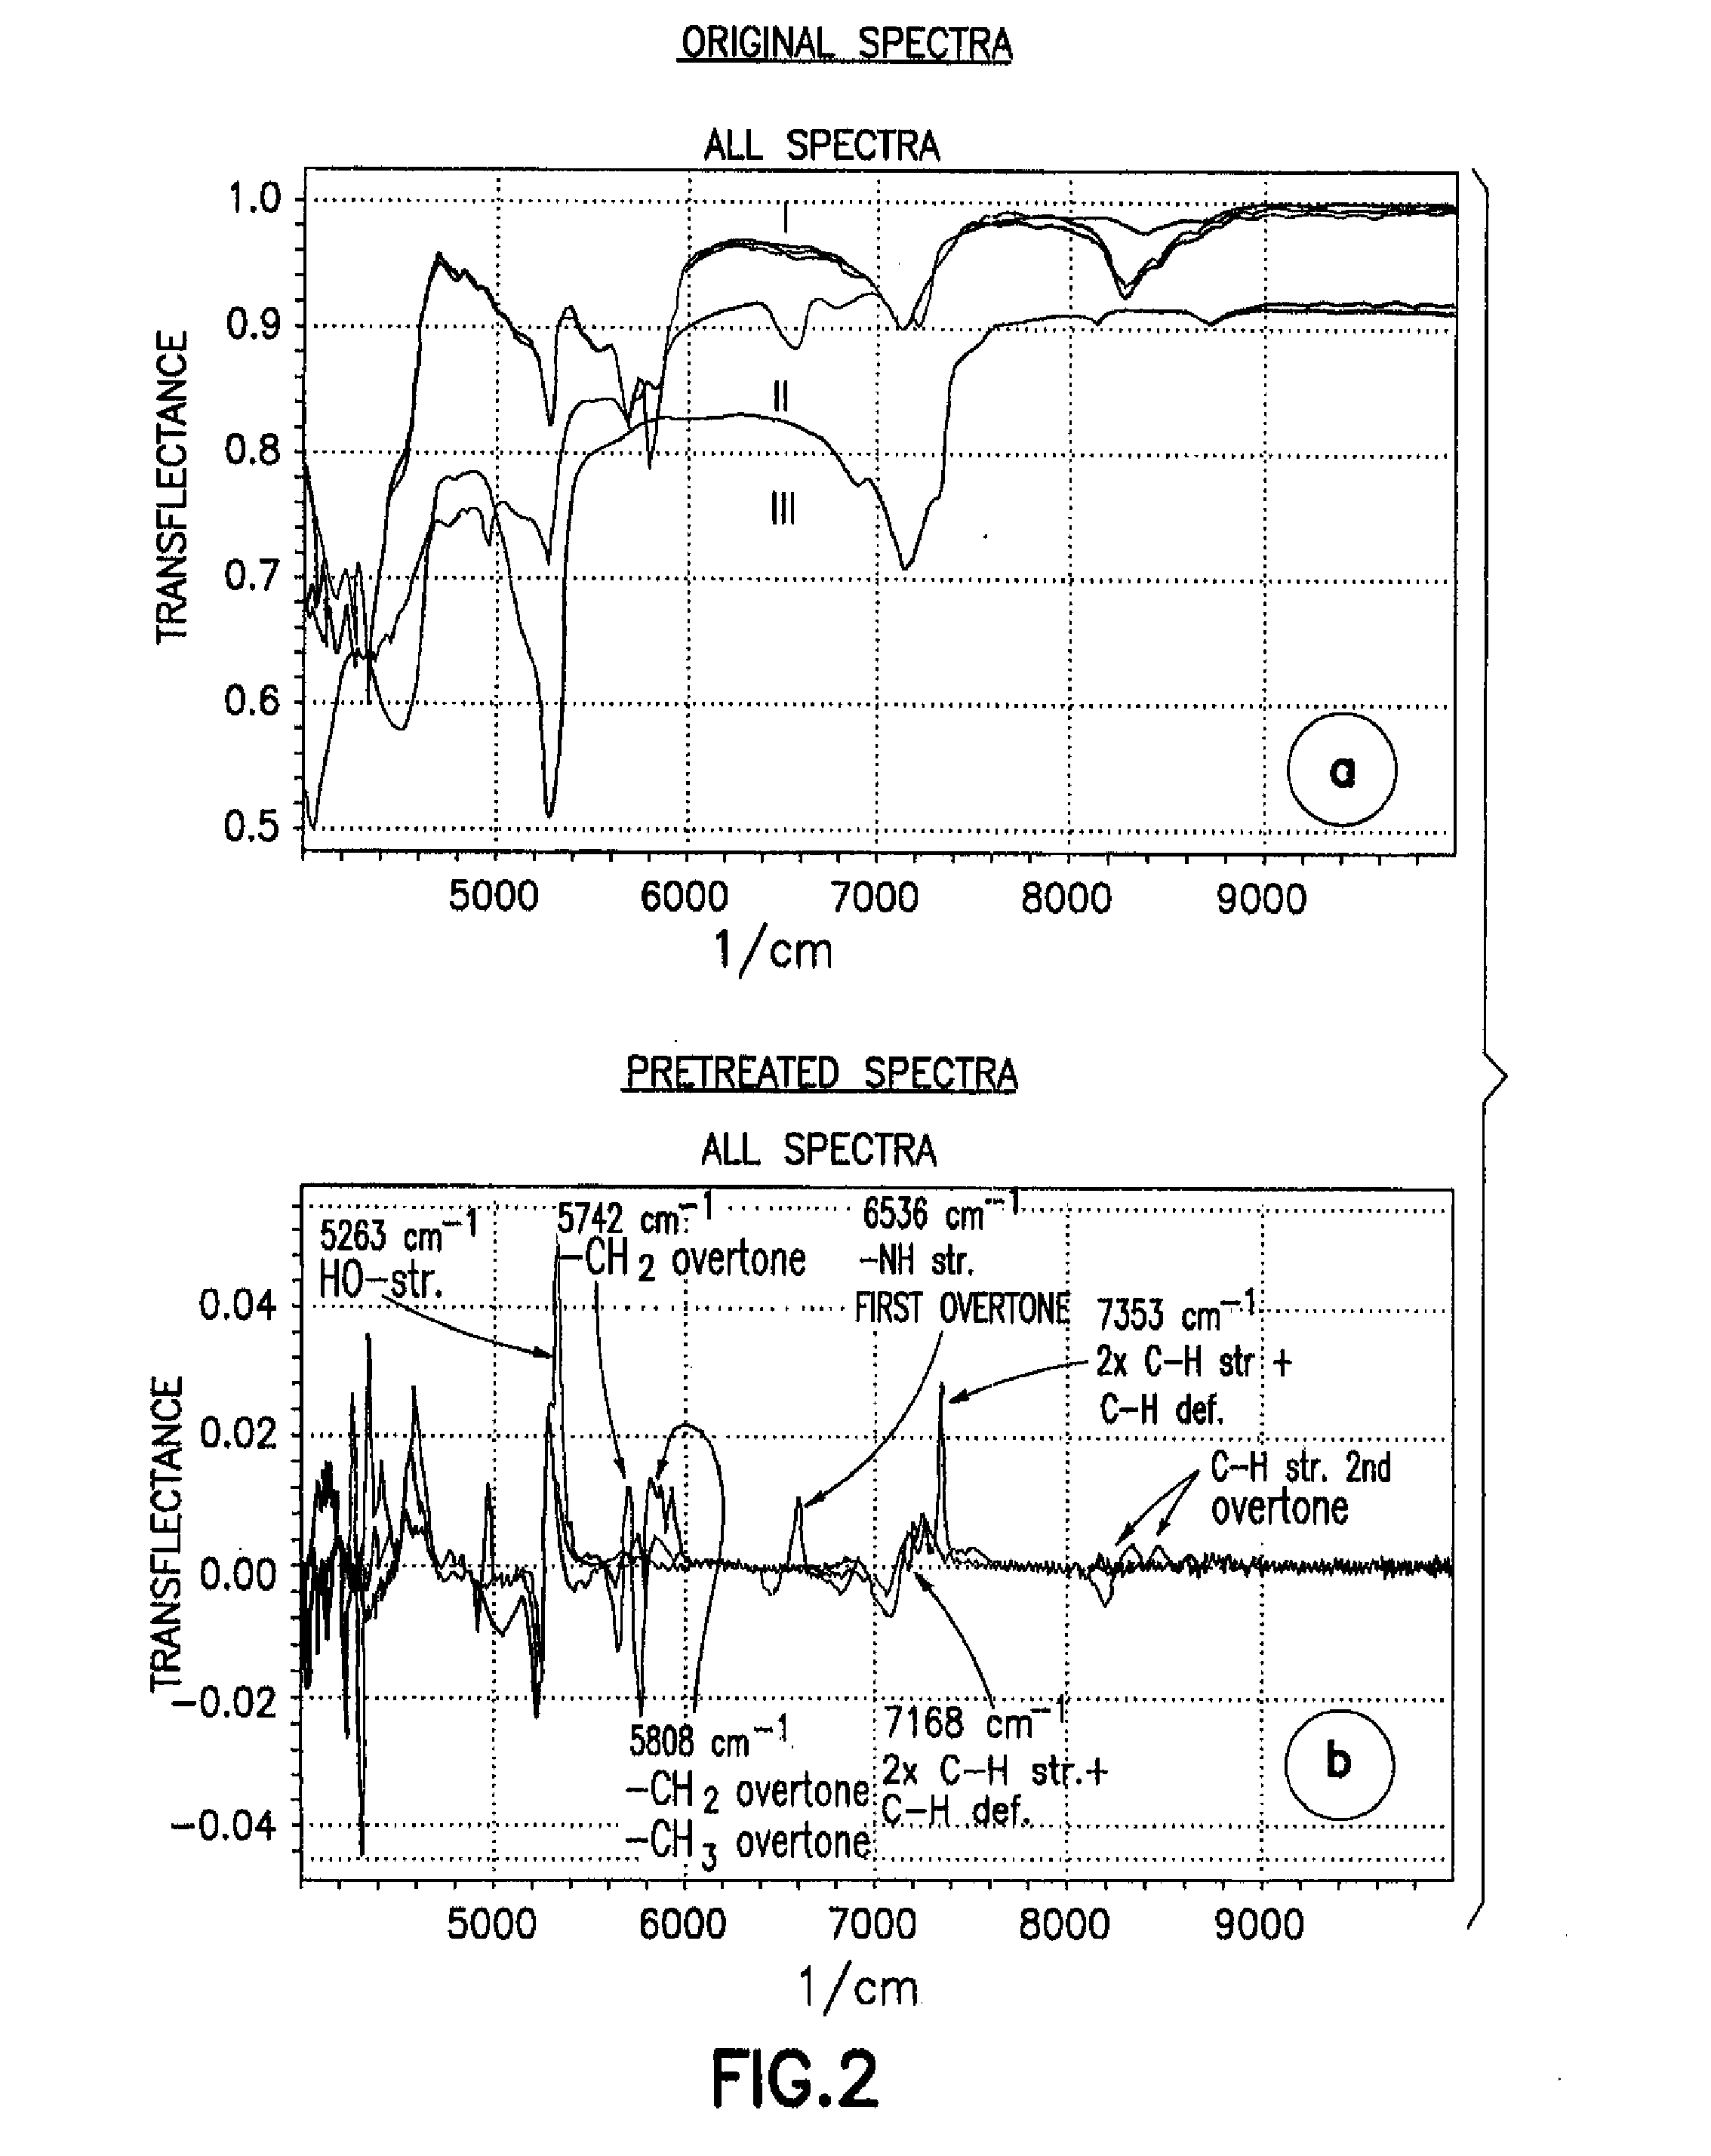 Method for classifying scientific materials such as silicate materials, polymer materials and/or nanomaterials